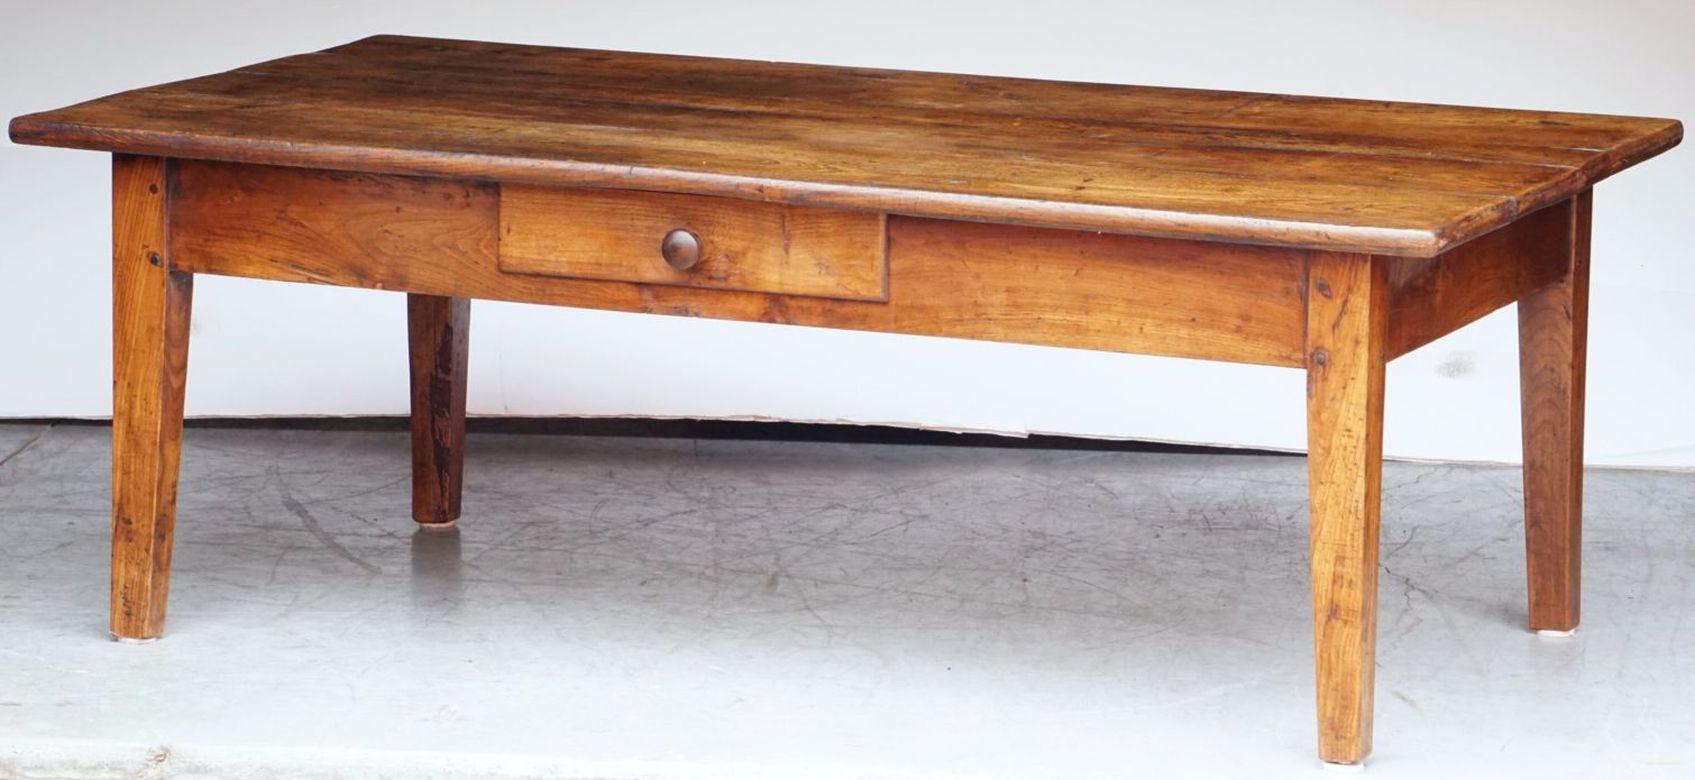 A large French rectangular coffee or low table of finely patinated fruitwood, featuring a handsome plank top set upon a frame of four pegged and tapered legs and one facing drawer with knob pull.

The whole with a fine patina - perfect for use as